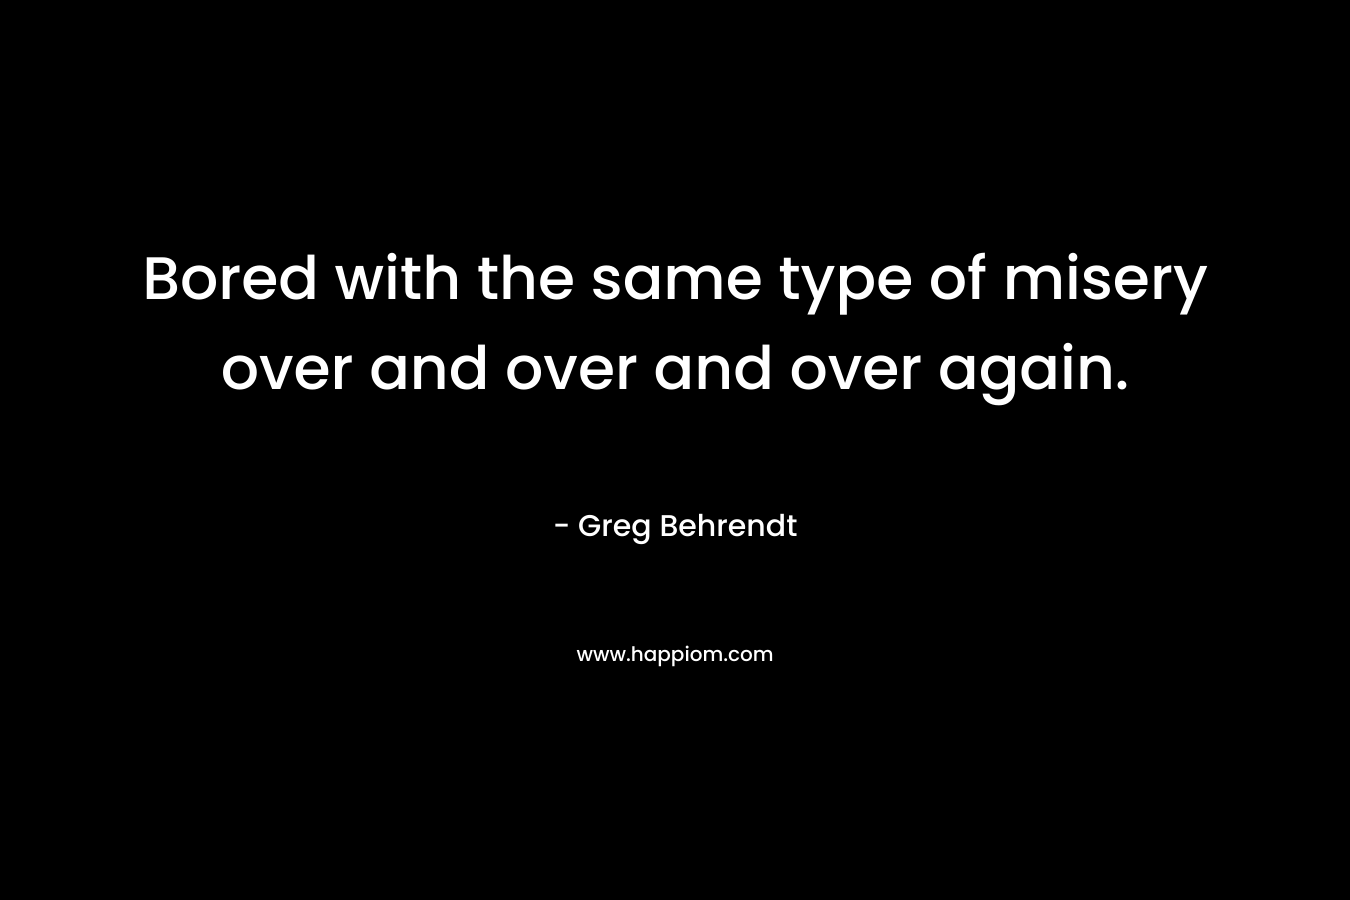 Bored with the same type of misery over and over and over again. – Greg Behrendt